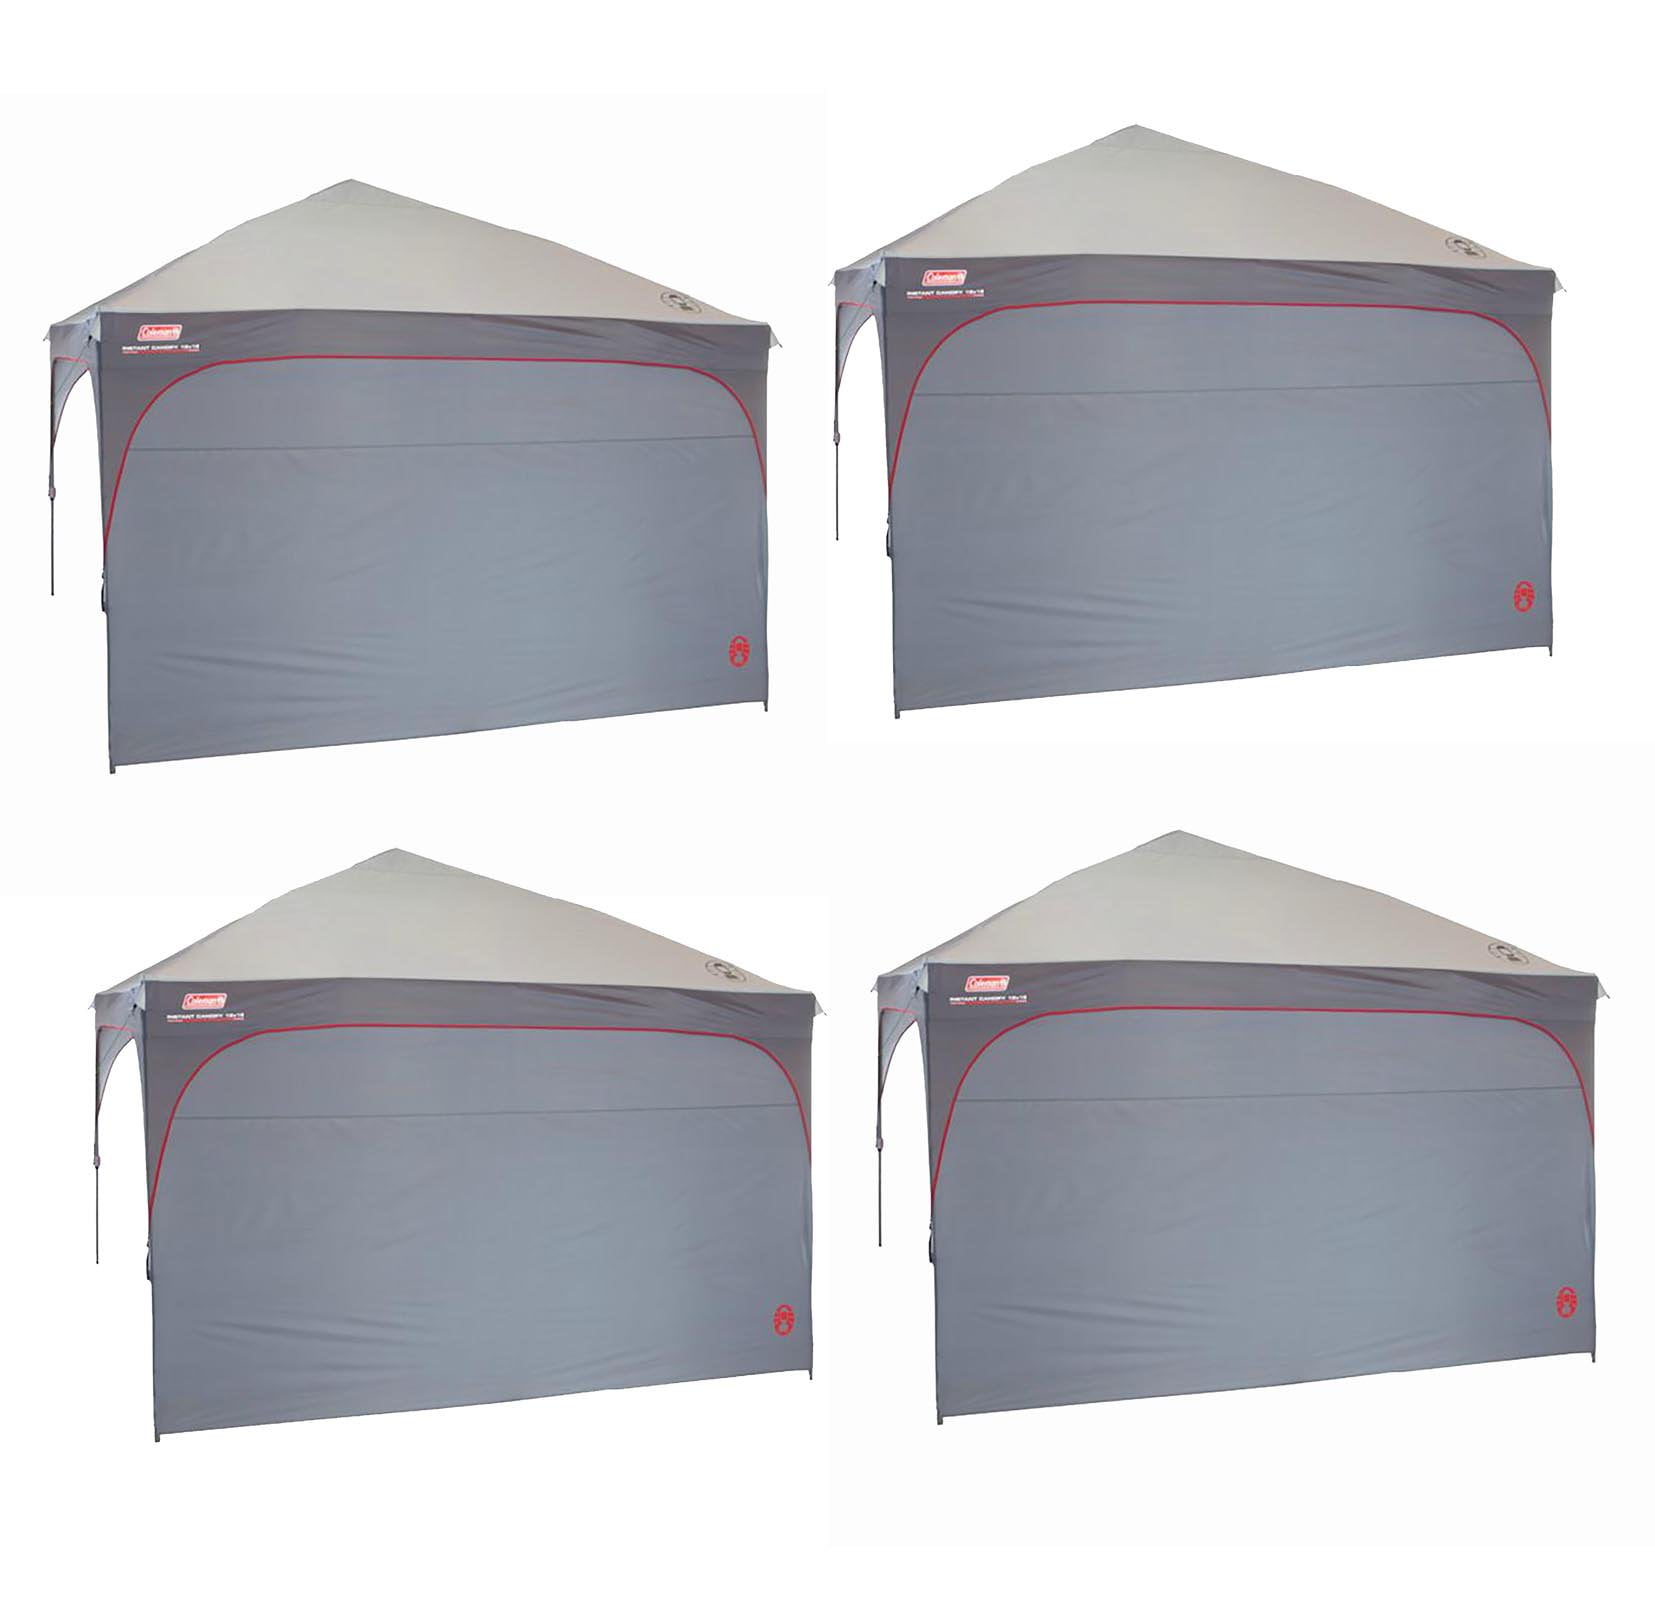 3m x 3m Coleman Instant Canopy Sunwall Accessory Fits 10 ft x 10ft Canopies 